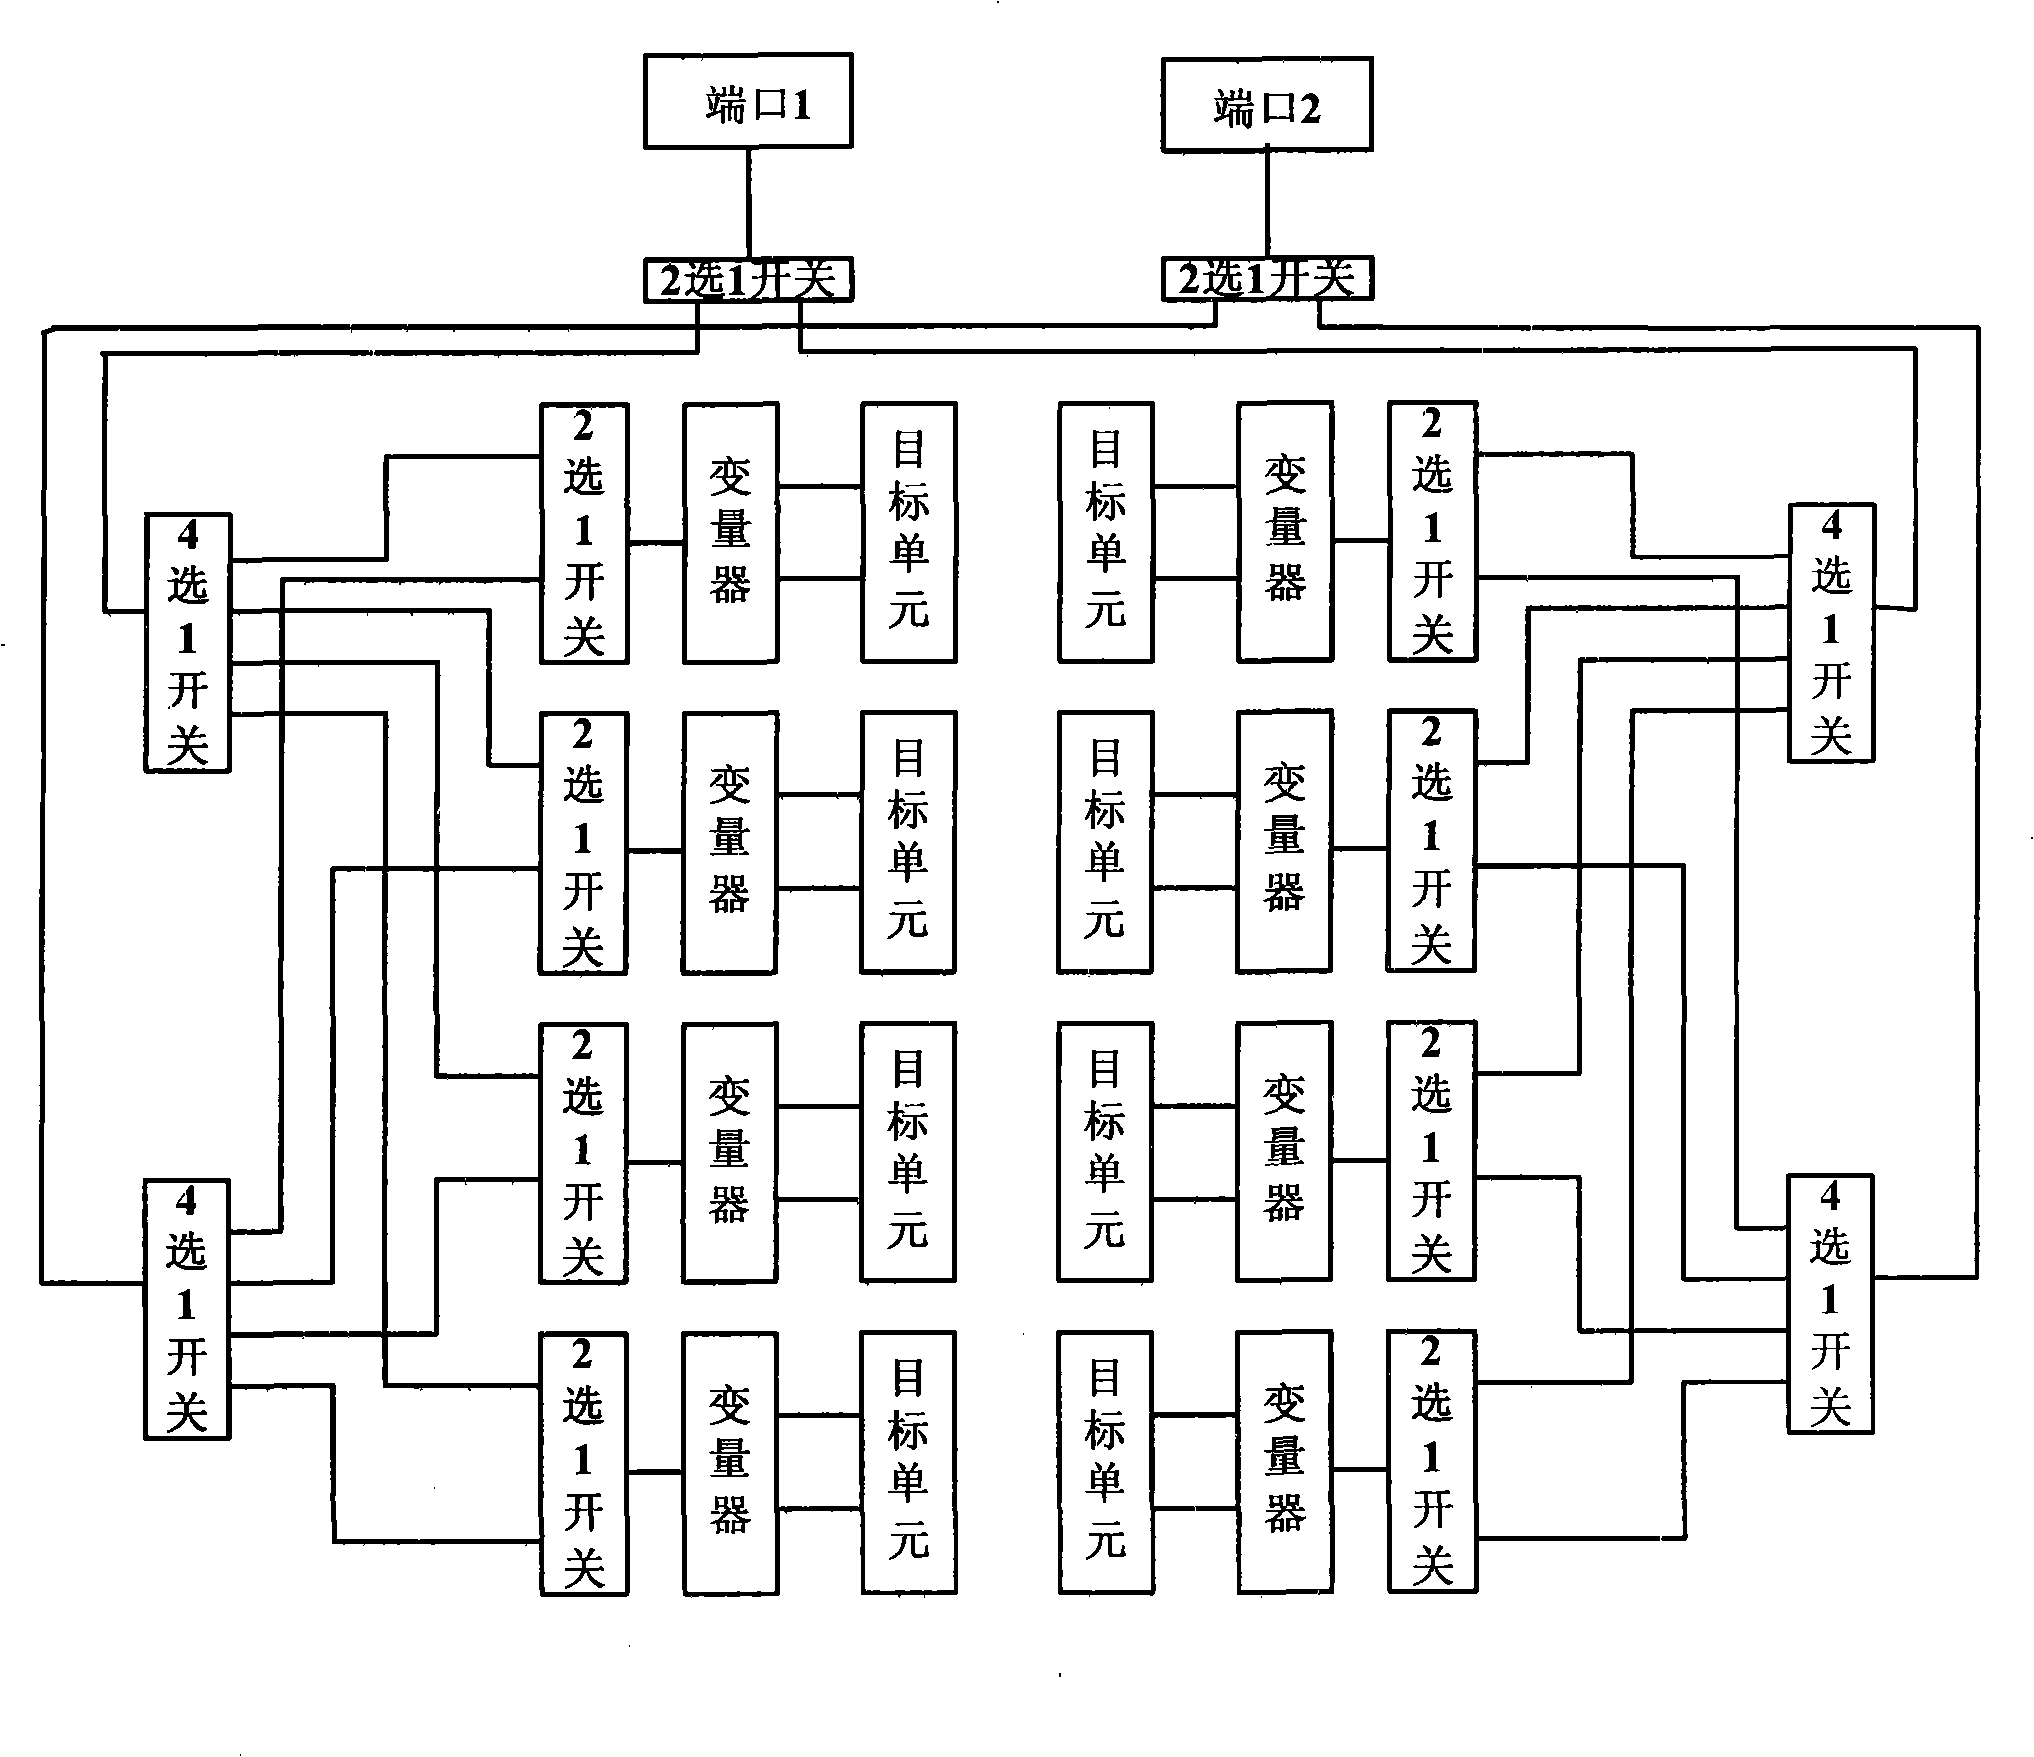 Cable test bus and switch matrix circuit